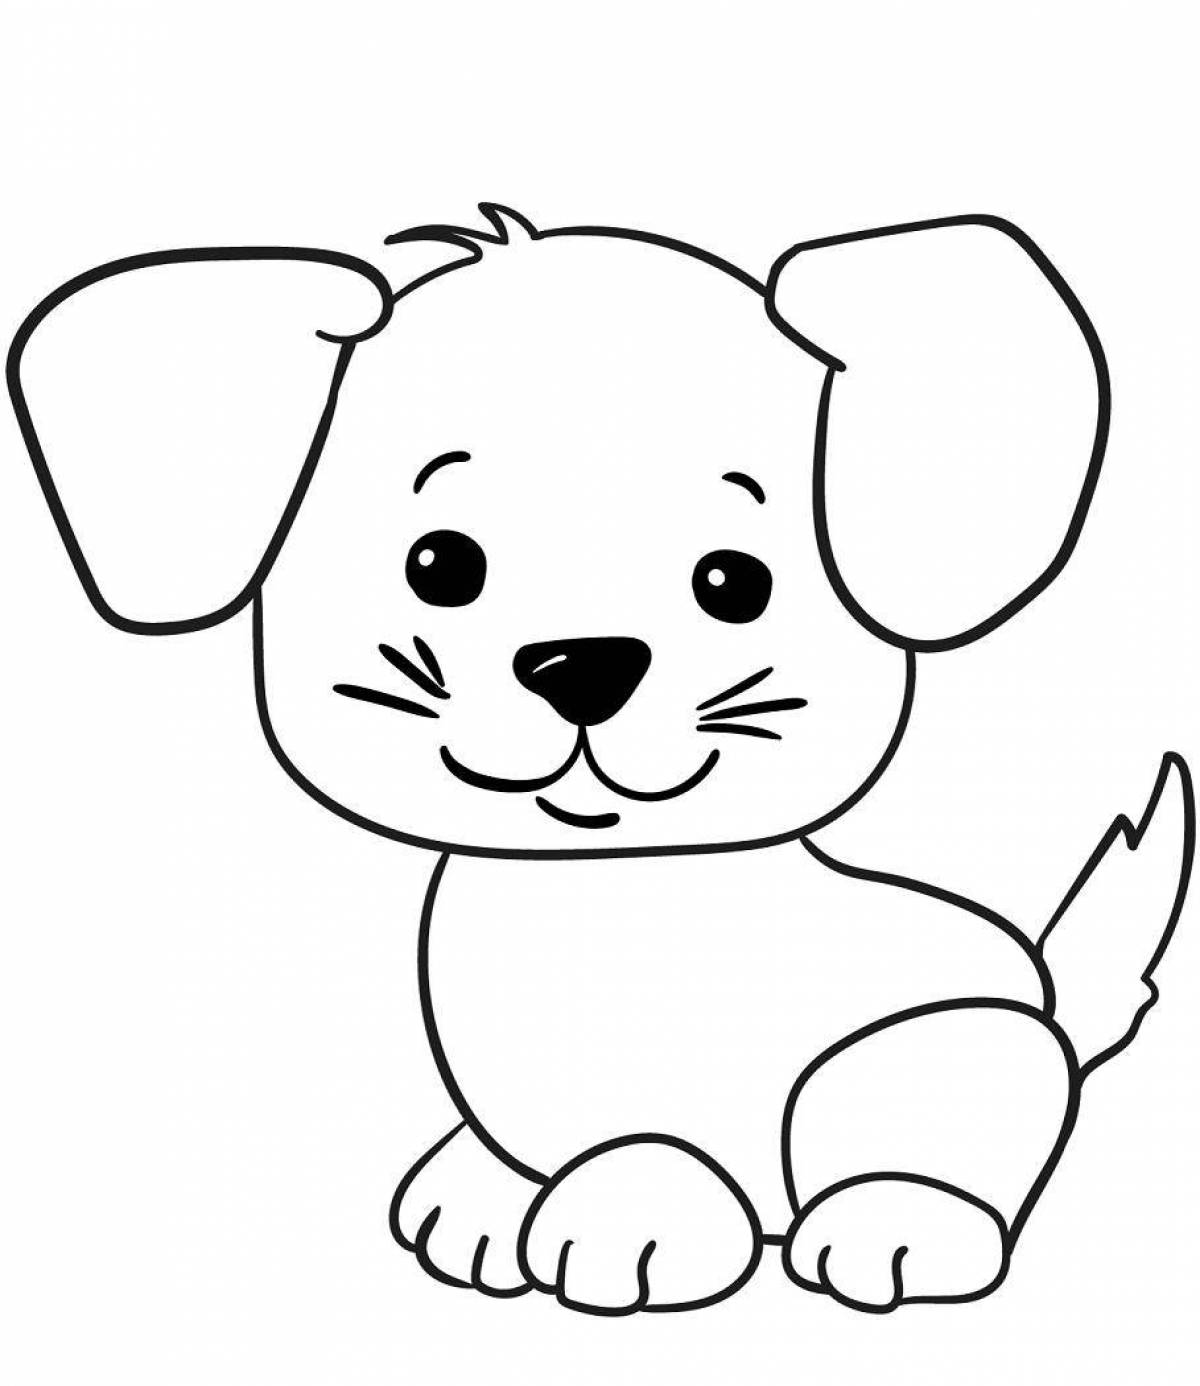 Wagging puppy coloring book for toddlers